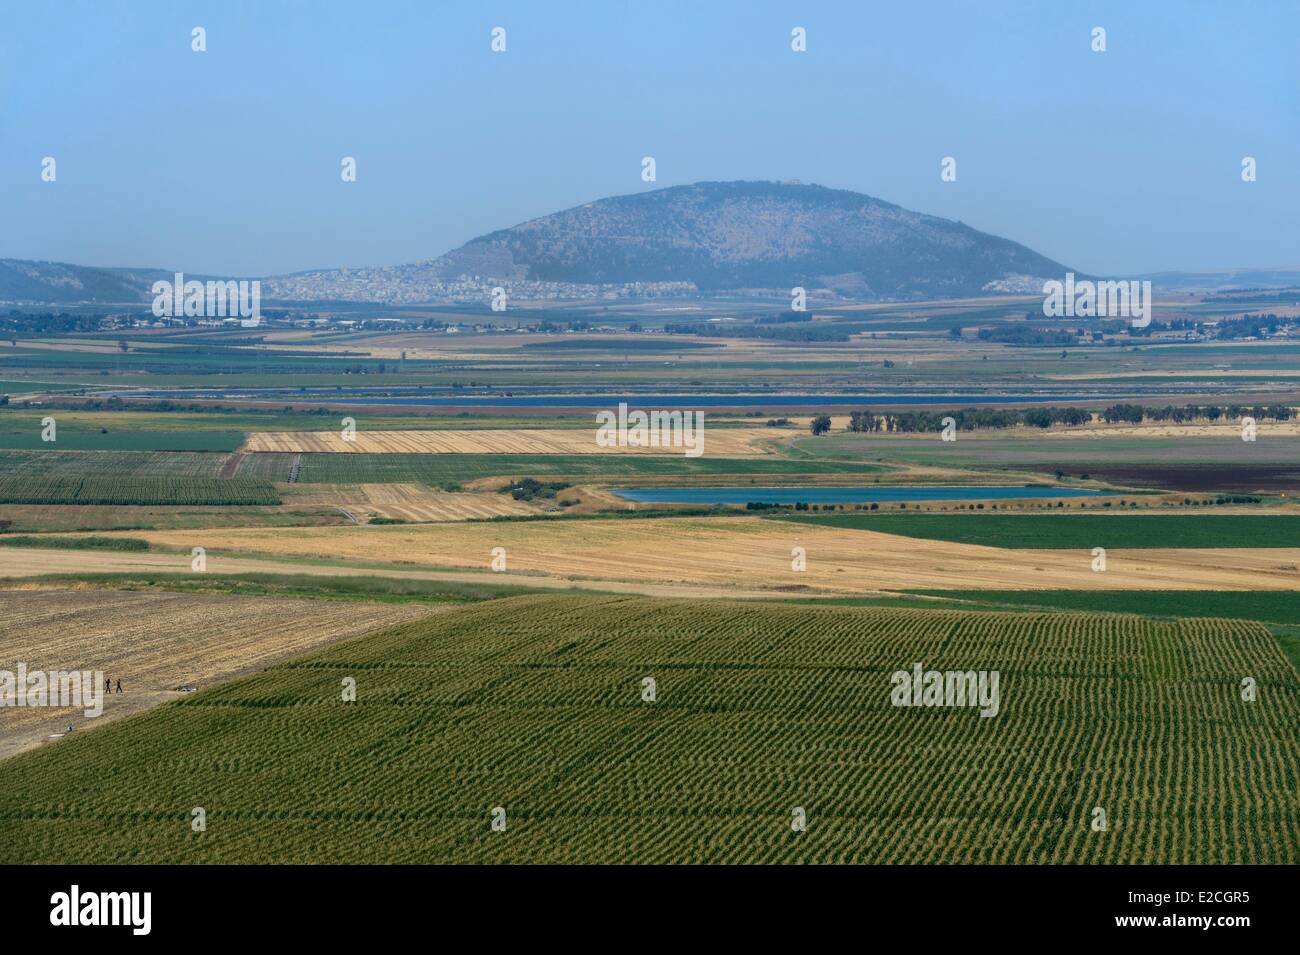 Israel, Northern District, Galilee, Jezreel Valley and the Mount Tabor in the background Stock Photo